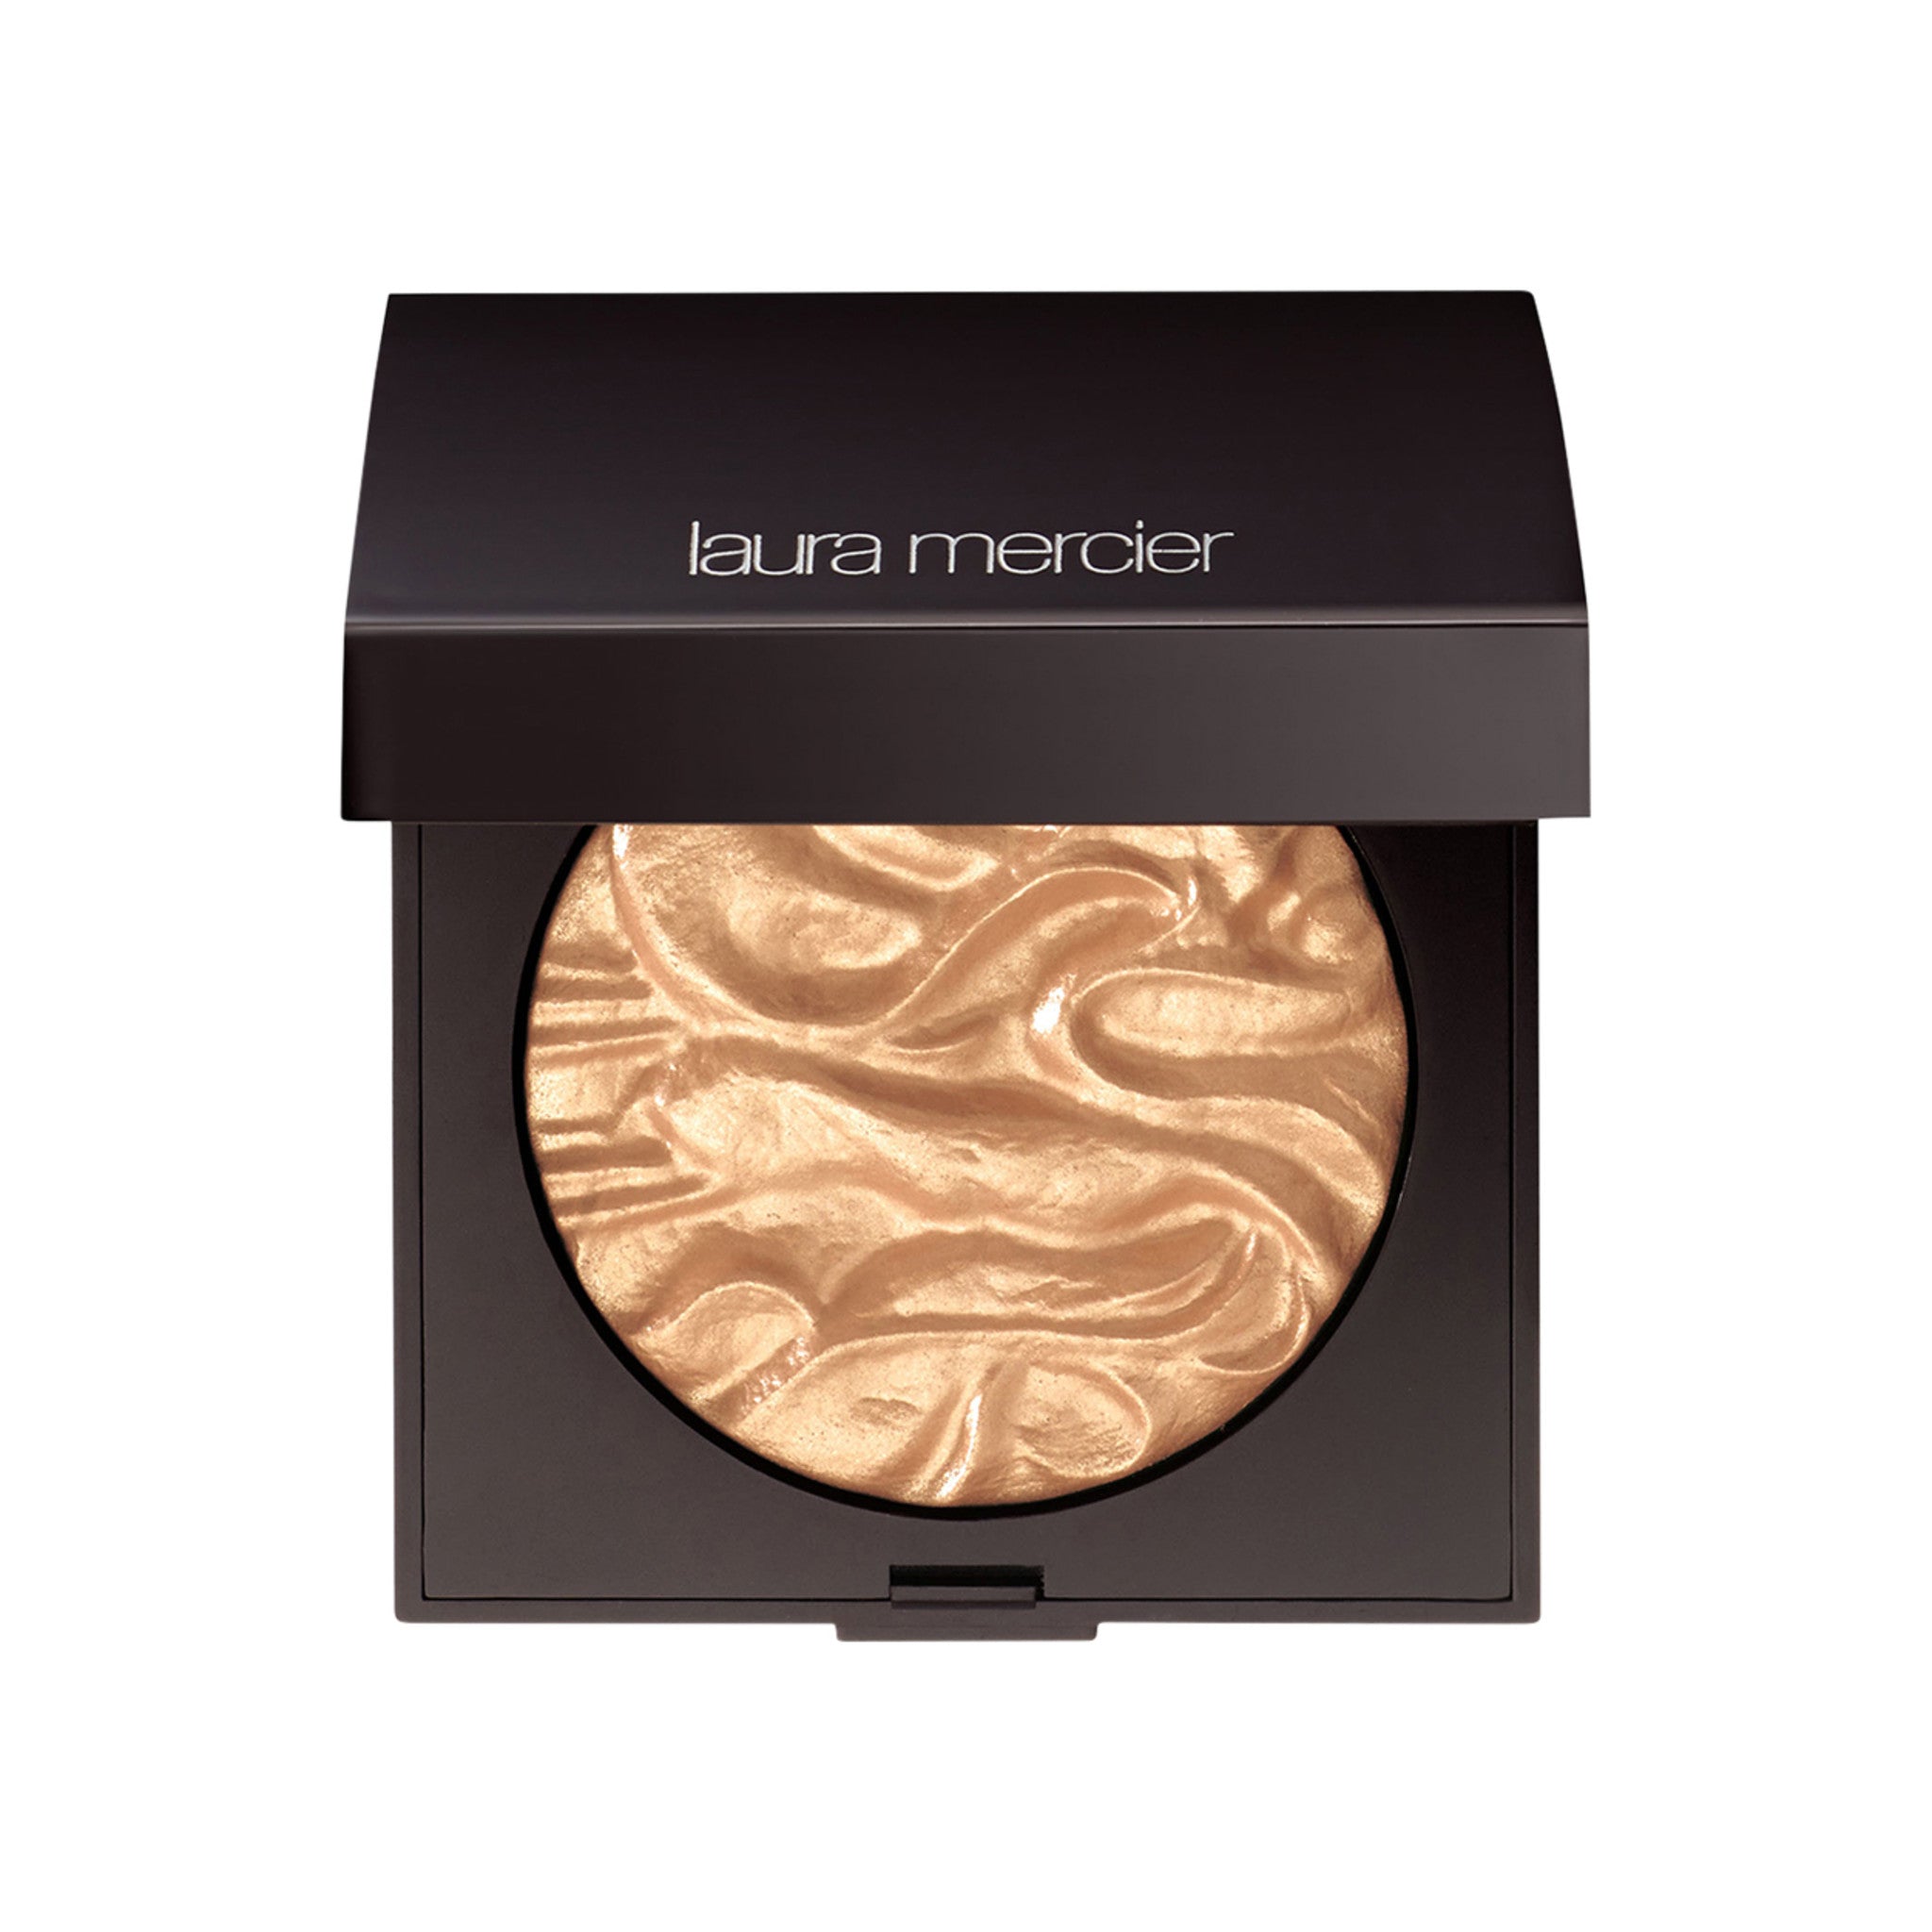 Laura Mercier Face Illuminator Color/Shade variant: Addiction main image. This product is in the color nude